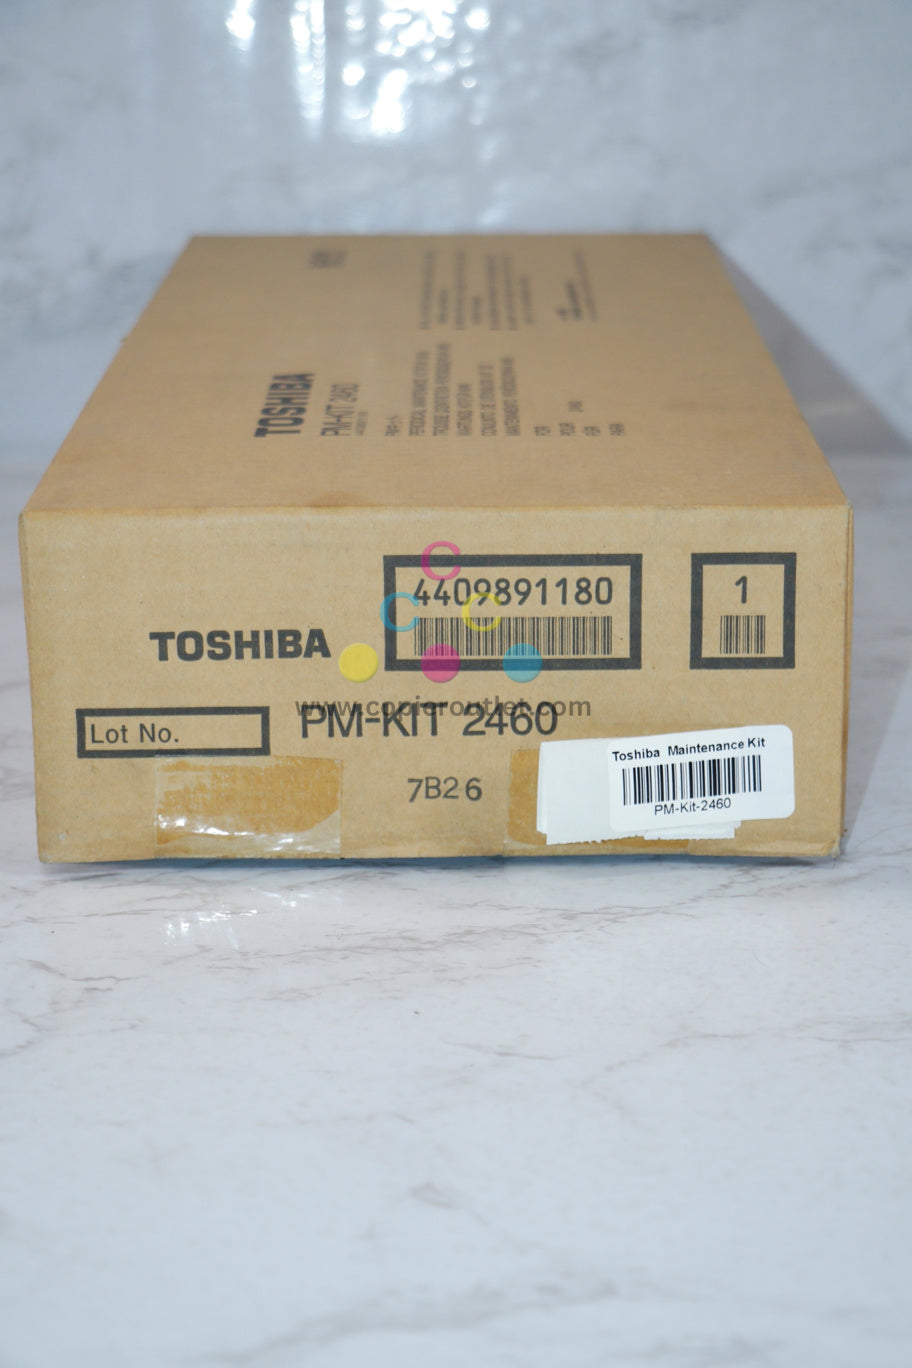 New Cosmetic Toshiba 6550,5540 PM Kit 2460(for 80K) PM-KIT 2460, 4409891180